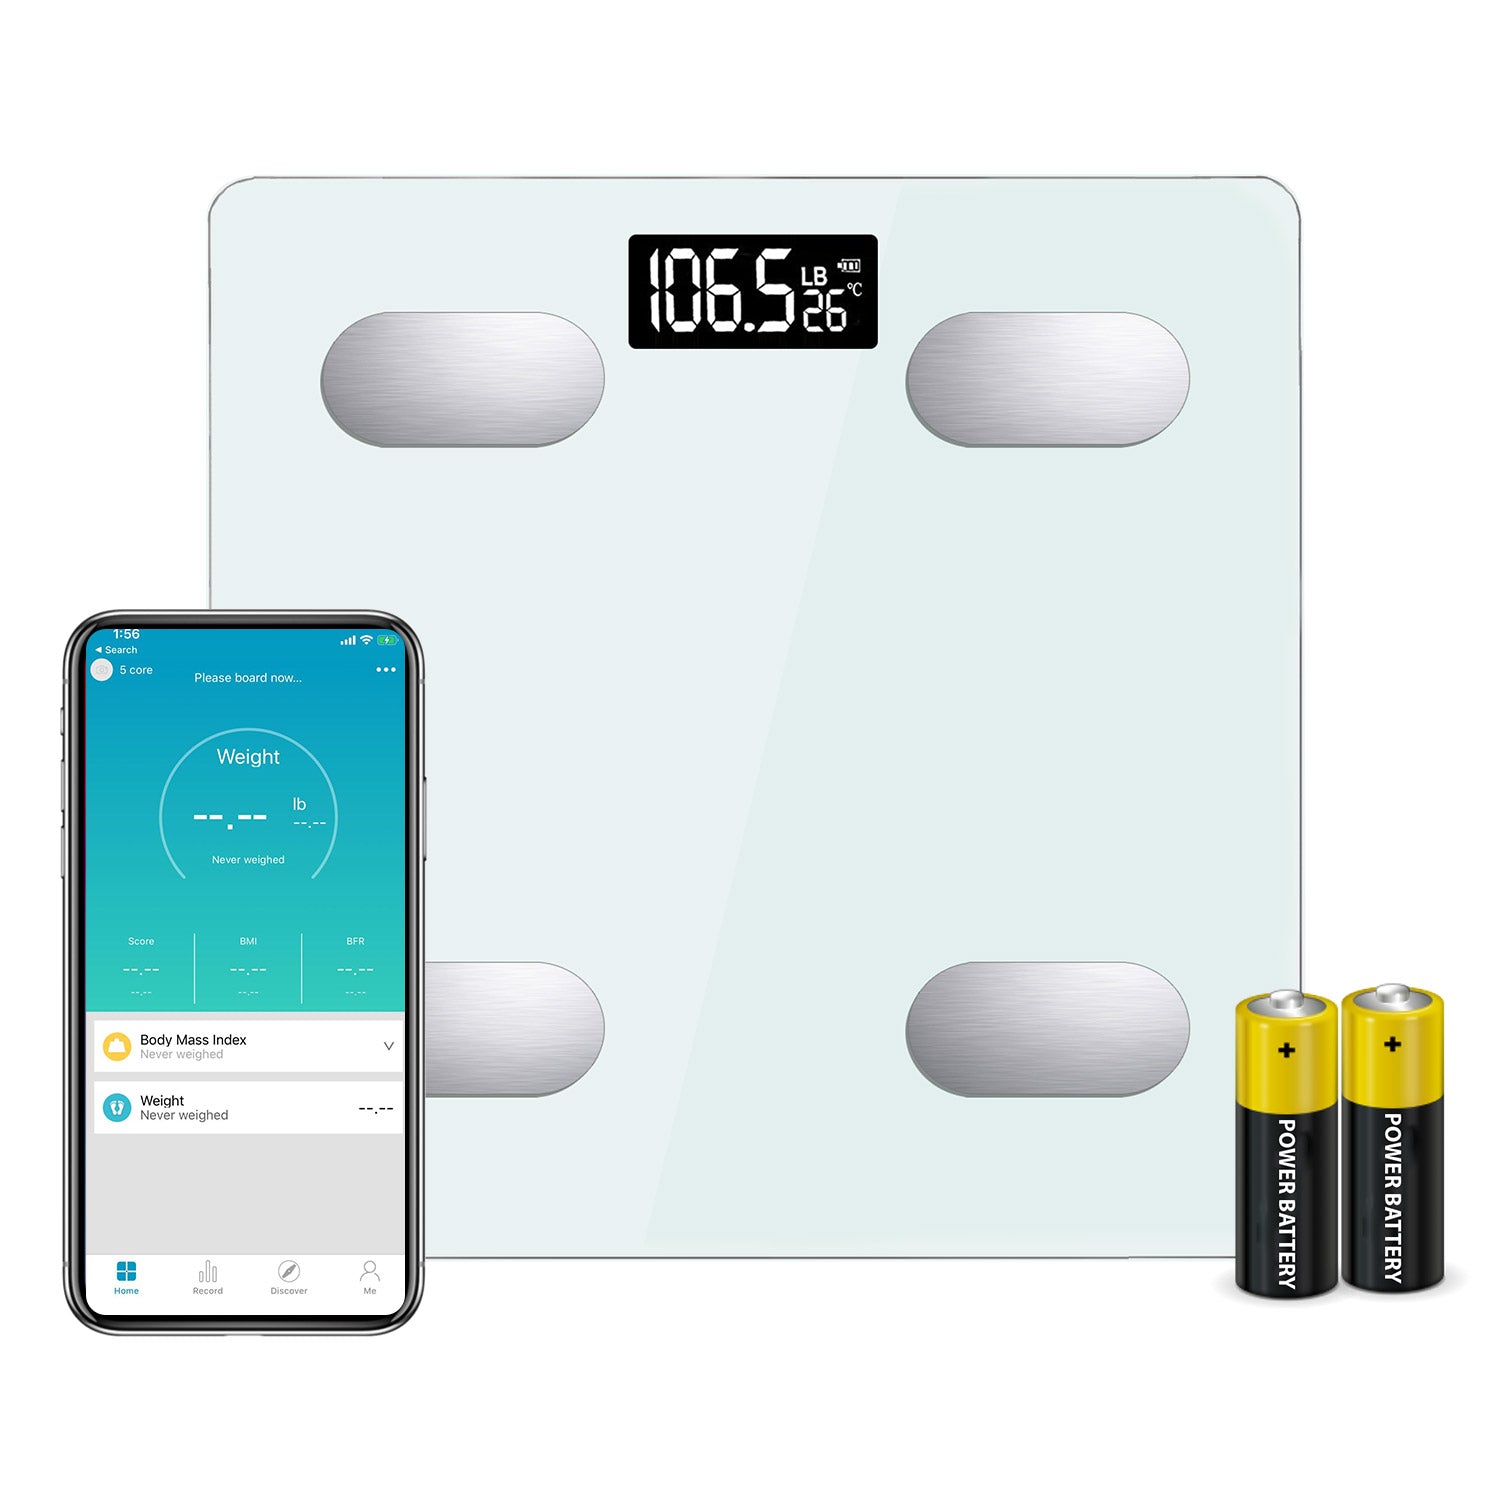 5 Core Smart Weight Scale Scale for Body Weight Digital Bathroom Scale BMI Weighing Bluetooth Body Fat Monitor Health Analyzer Sync w App -BBS HL B WH